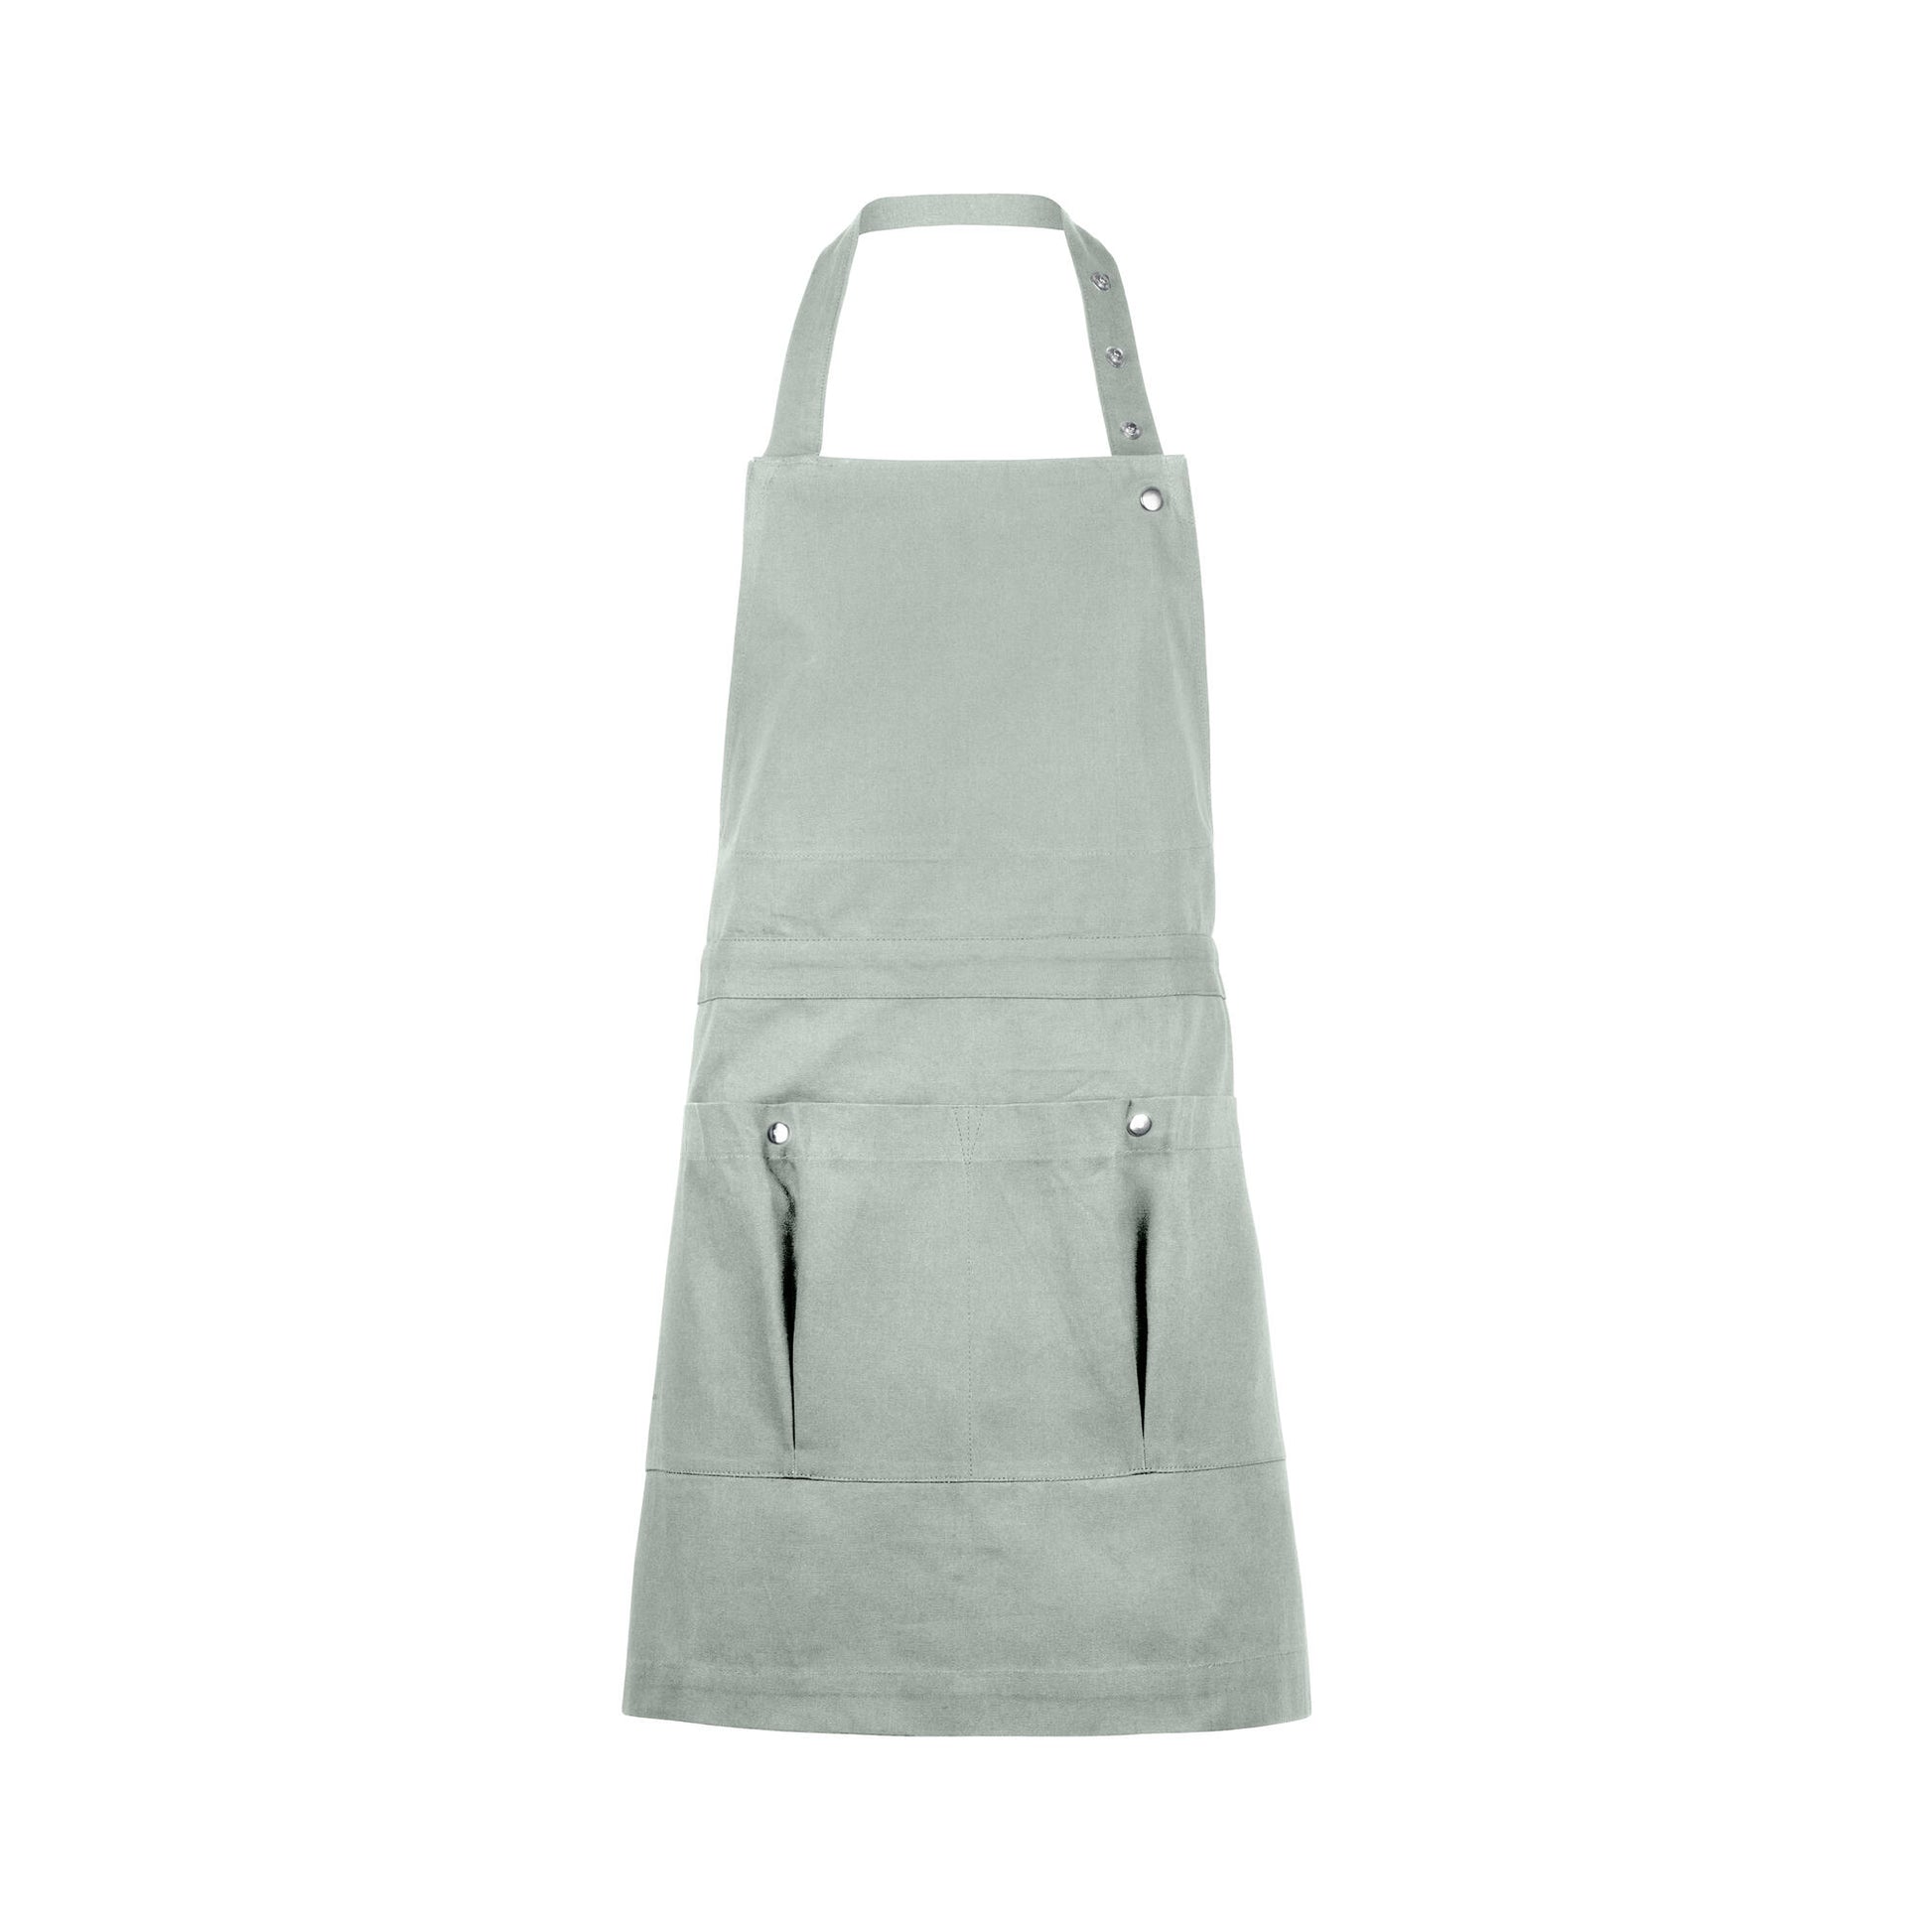 The Organic Company Creative and Garden Apron in Dusty Mint